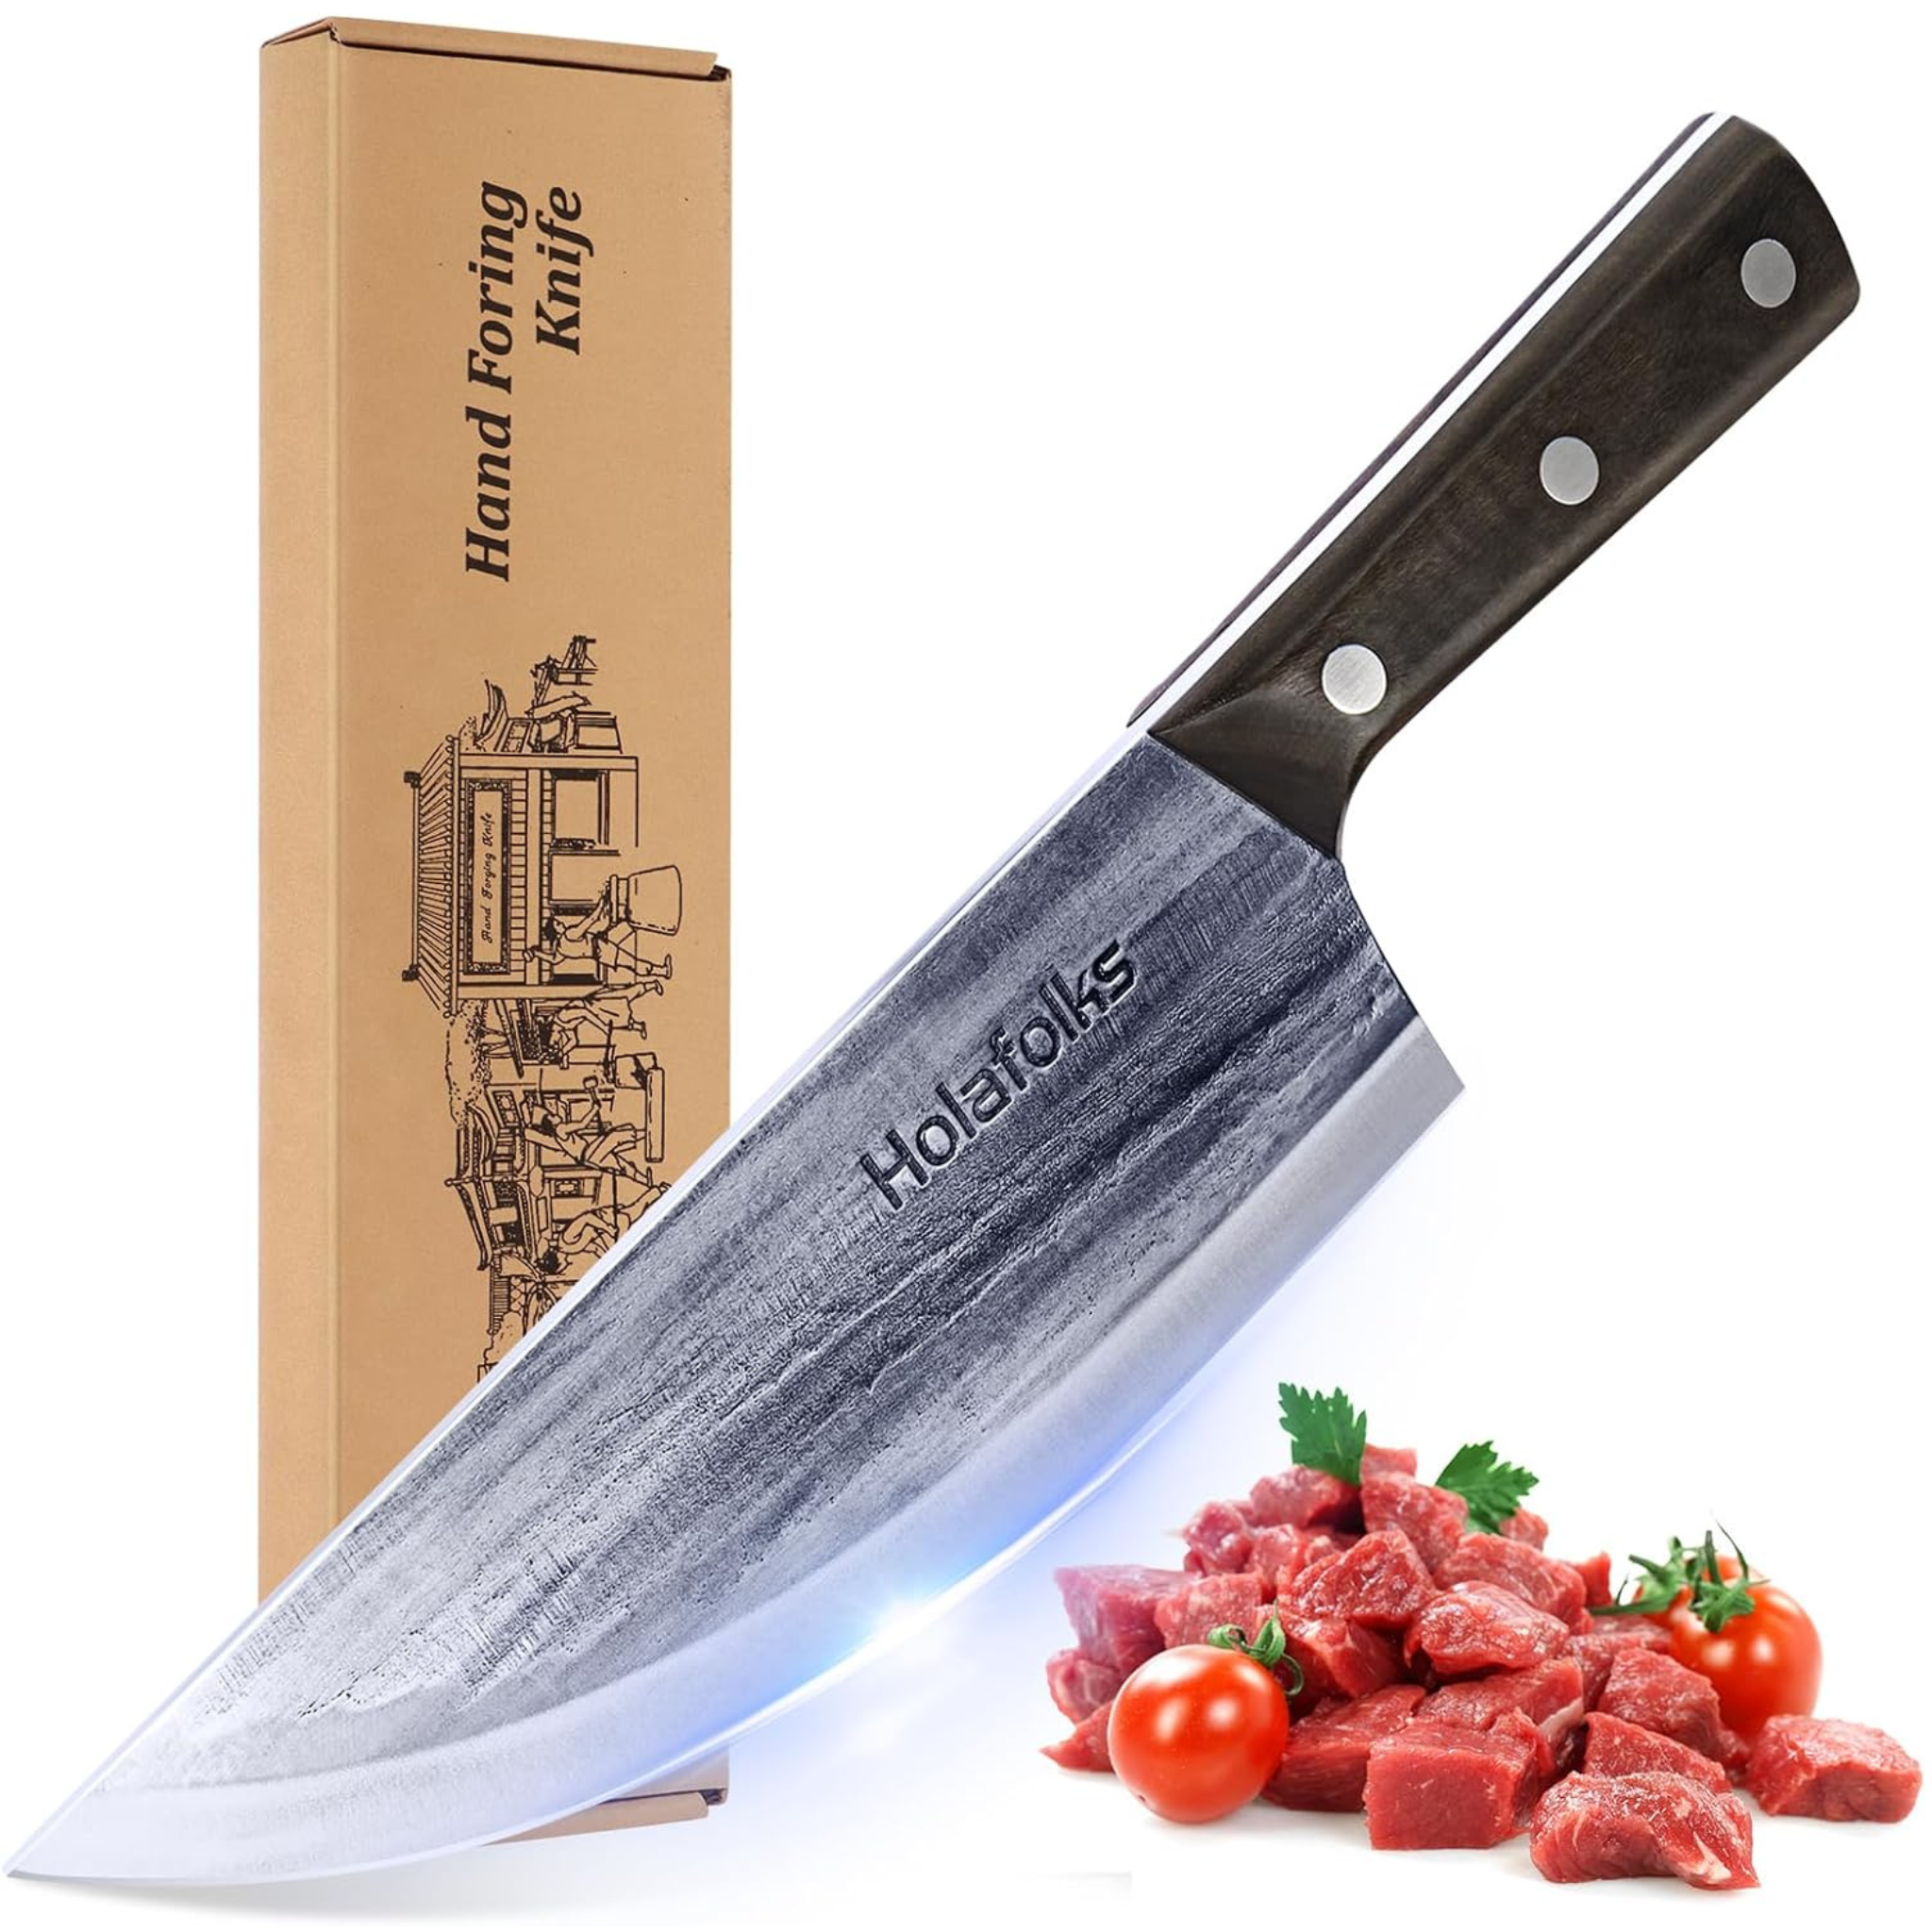 HolaFolks Anti-Rust Oil Coating Kitchen Cooking Knife